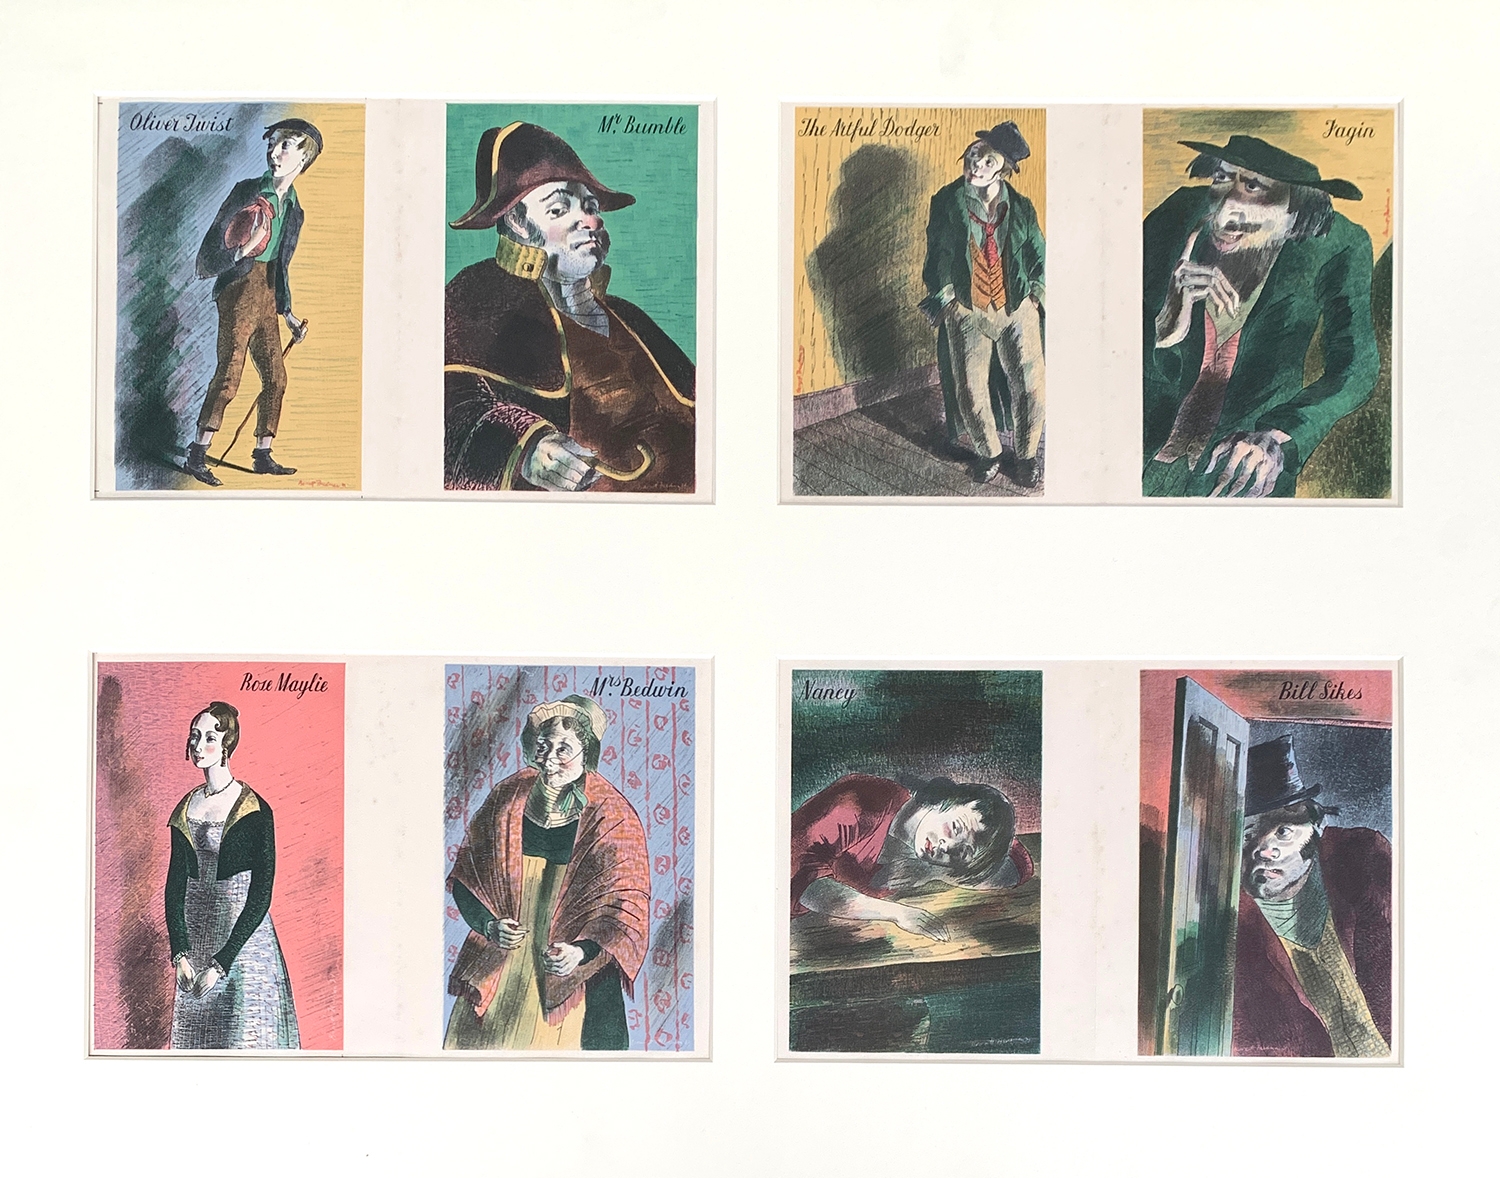 Barnett Freedman (1901-1958), a set of eight coloured lithographic illustrations for 'Oliver Twist',